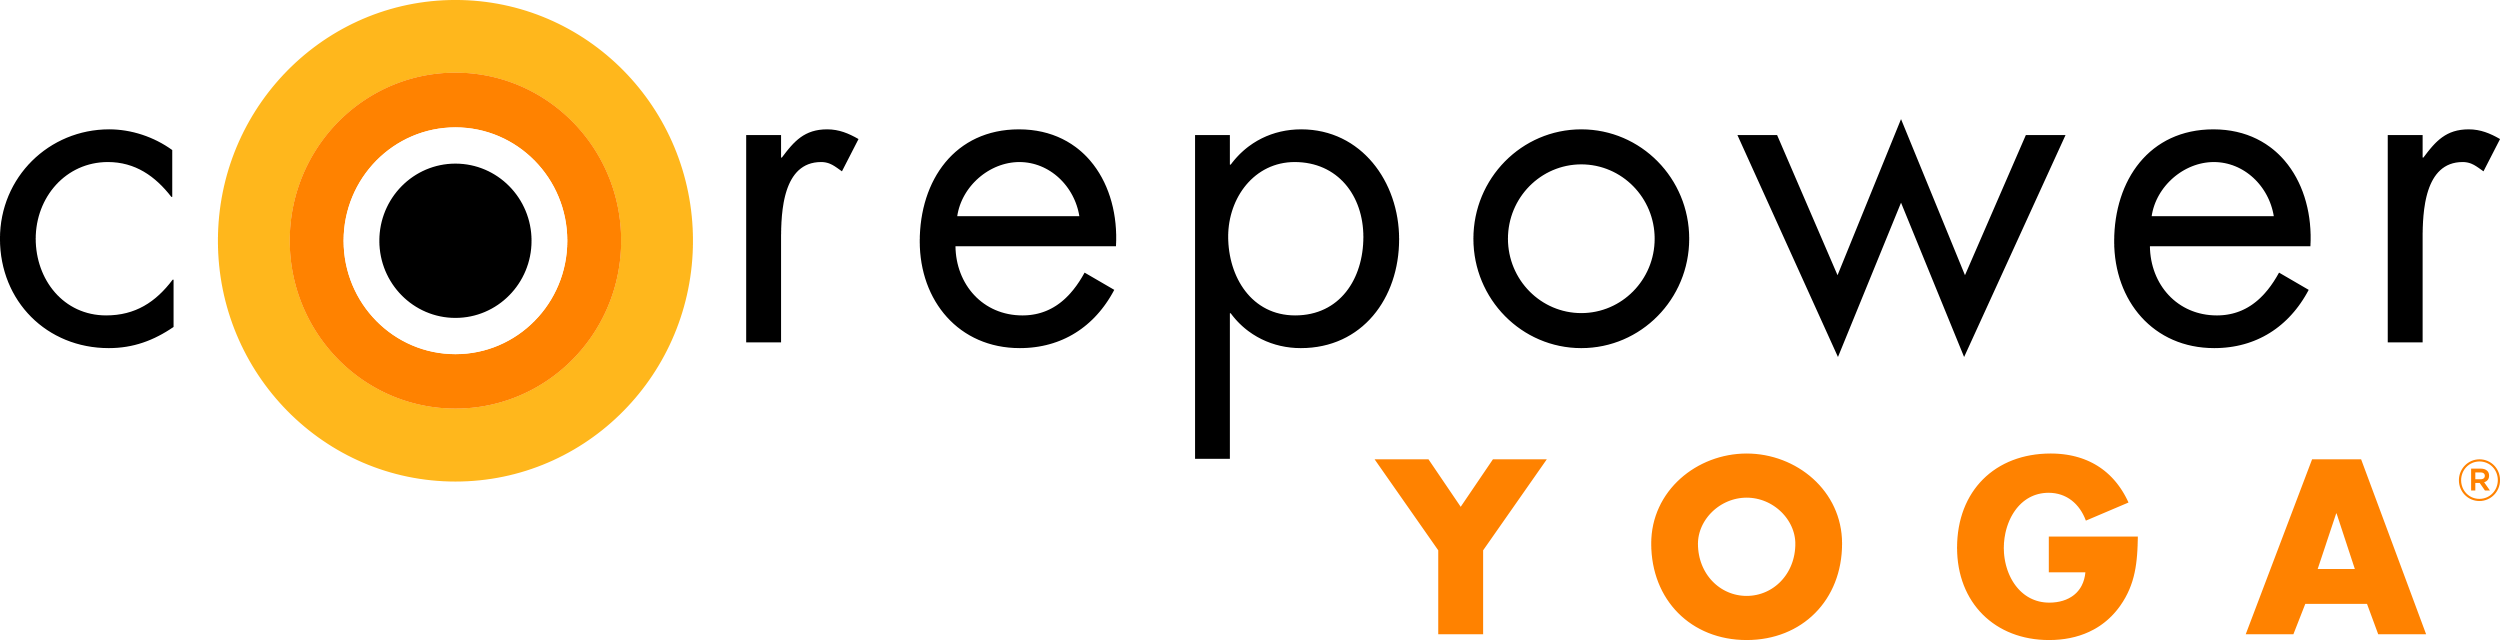 logo20171127-15261-46gbyt.png